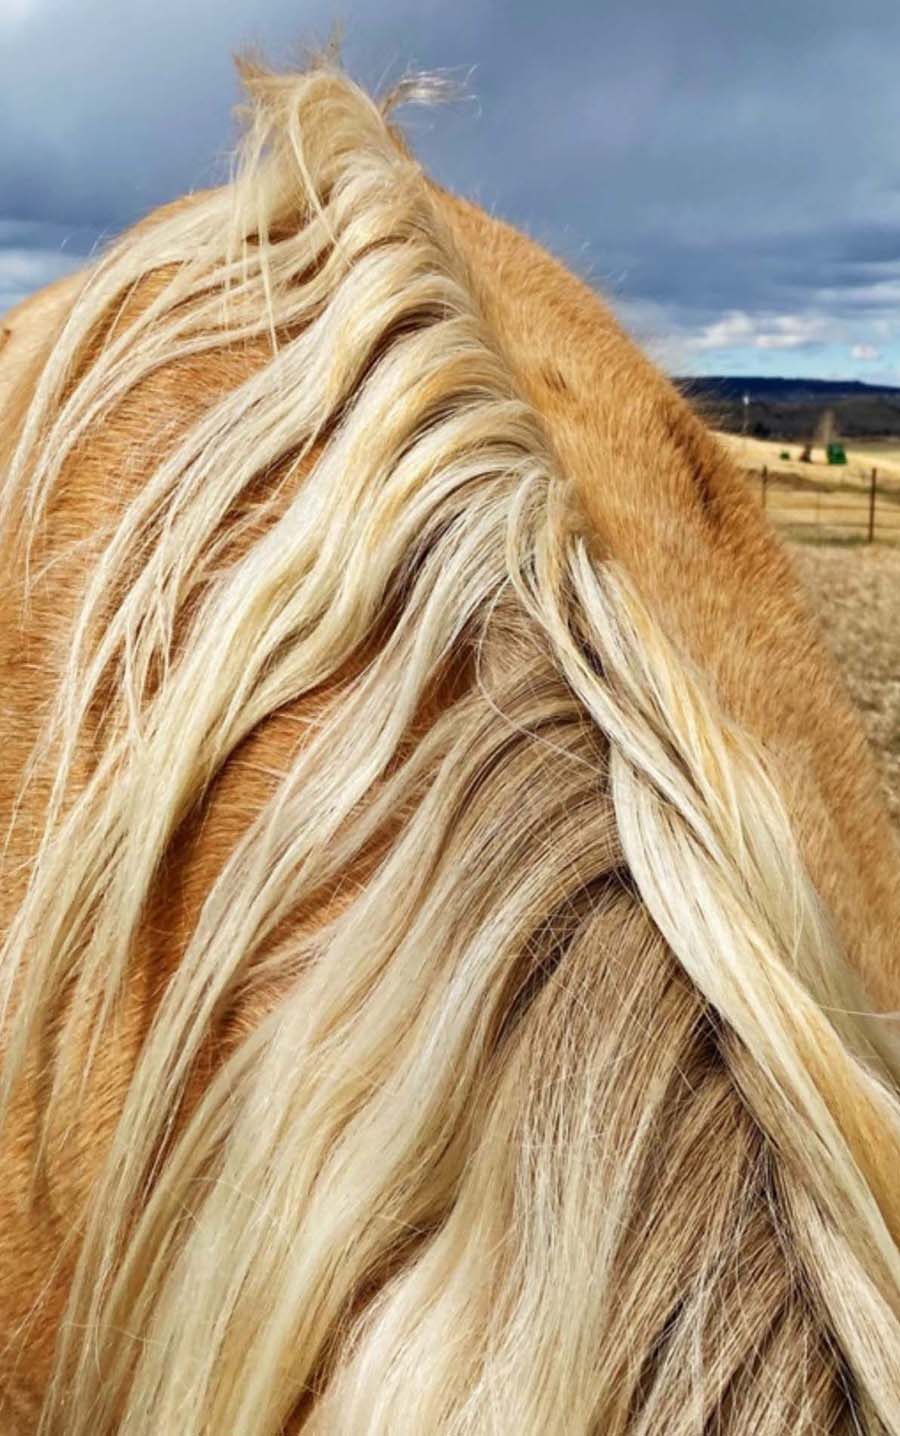 An Oniya horse with a blonde coat and mane